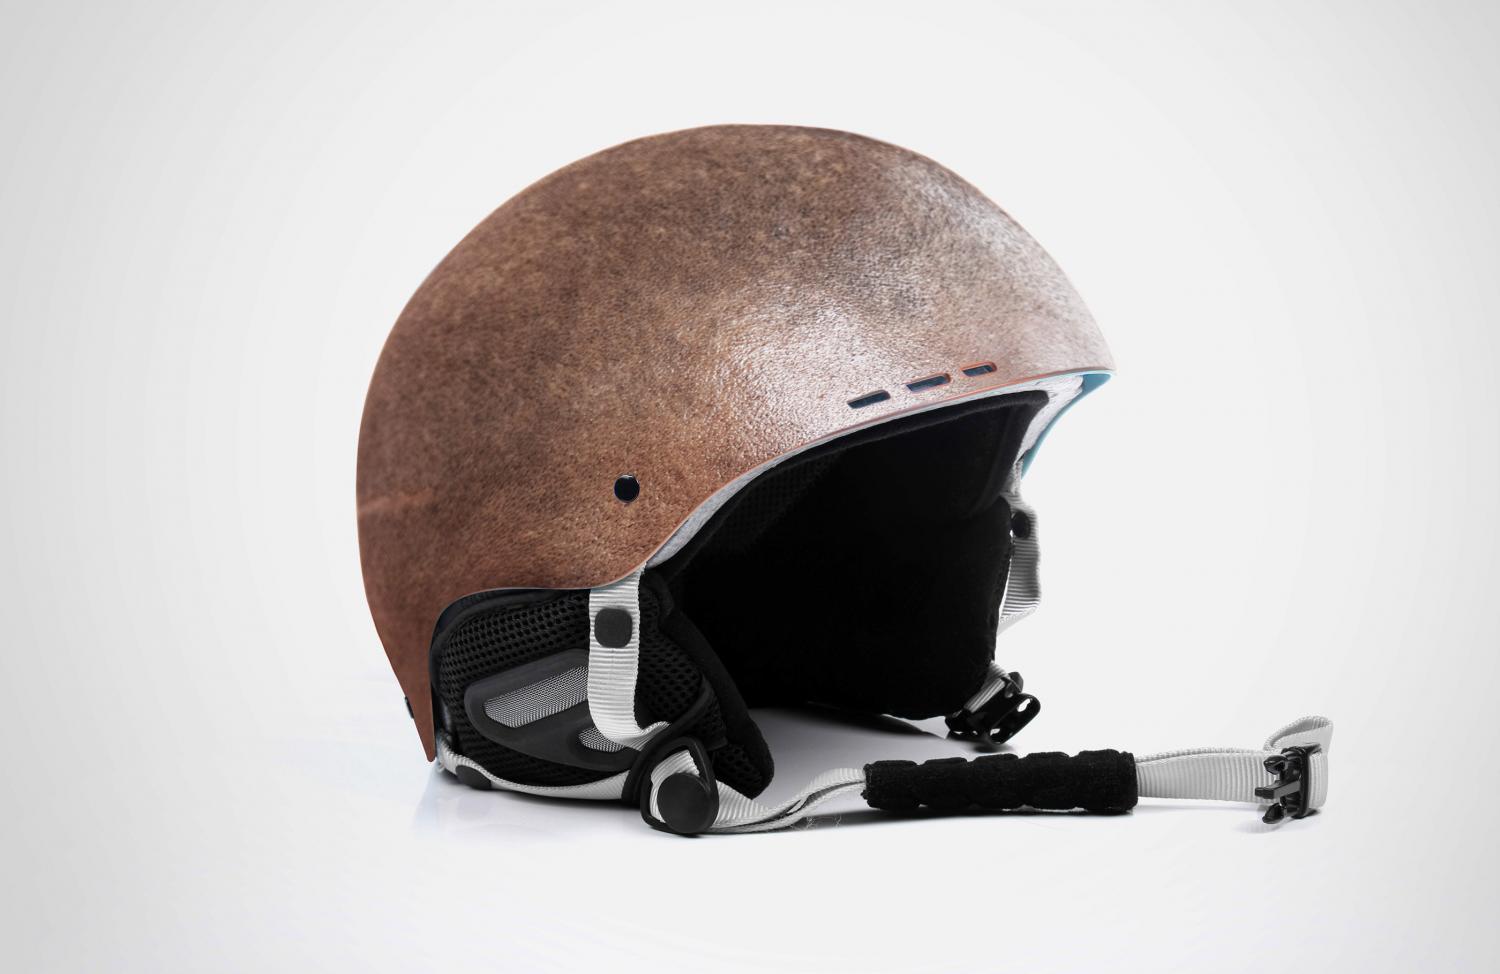 Motorcycle Helmets That Are Modeled After Actual Human Heads - Creepy Bald Human Head Bike Helmets